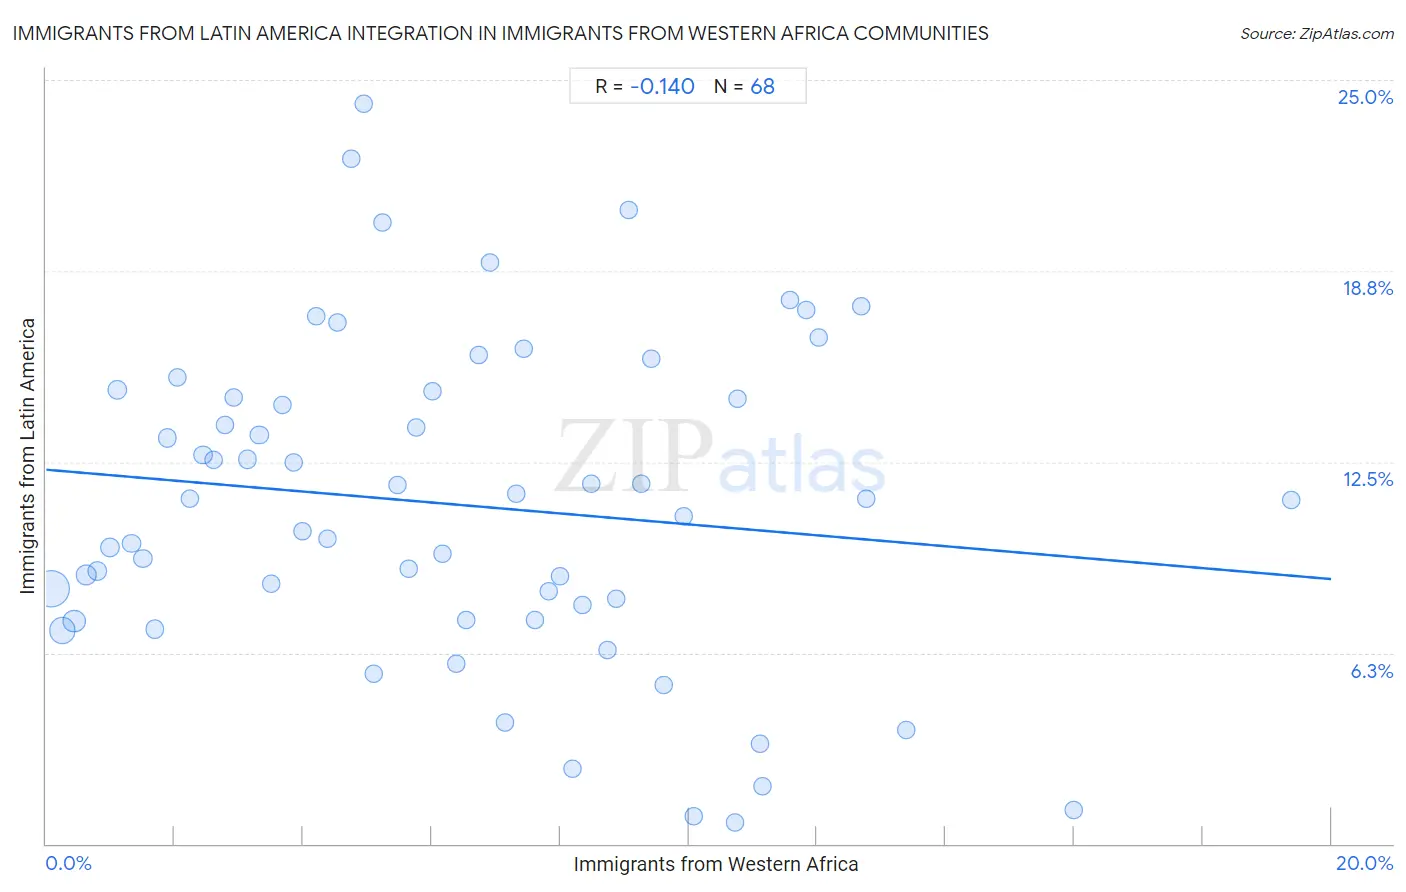 Immigrants from Western Africa Integration in Immigrants from Latin America Communities